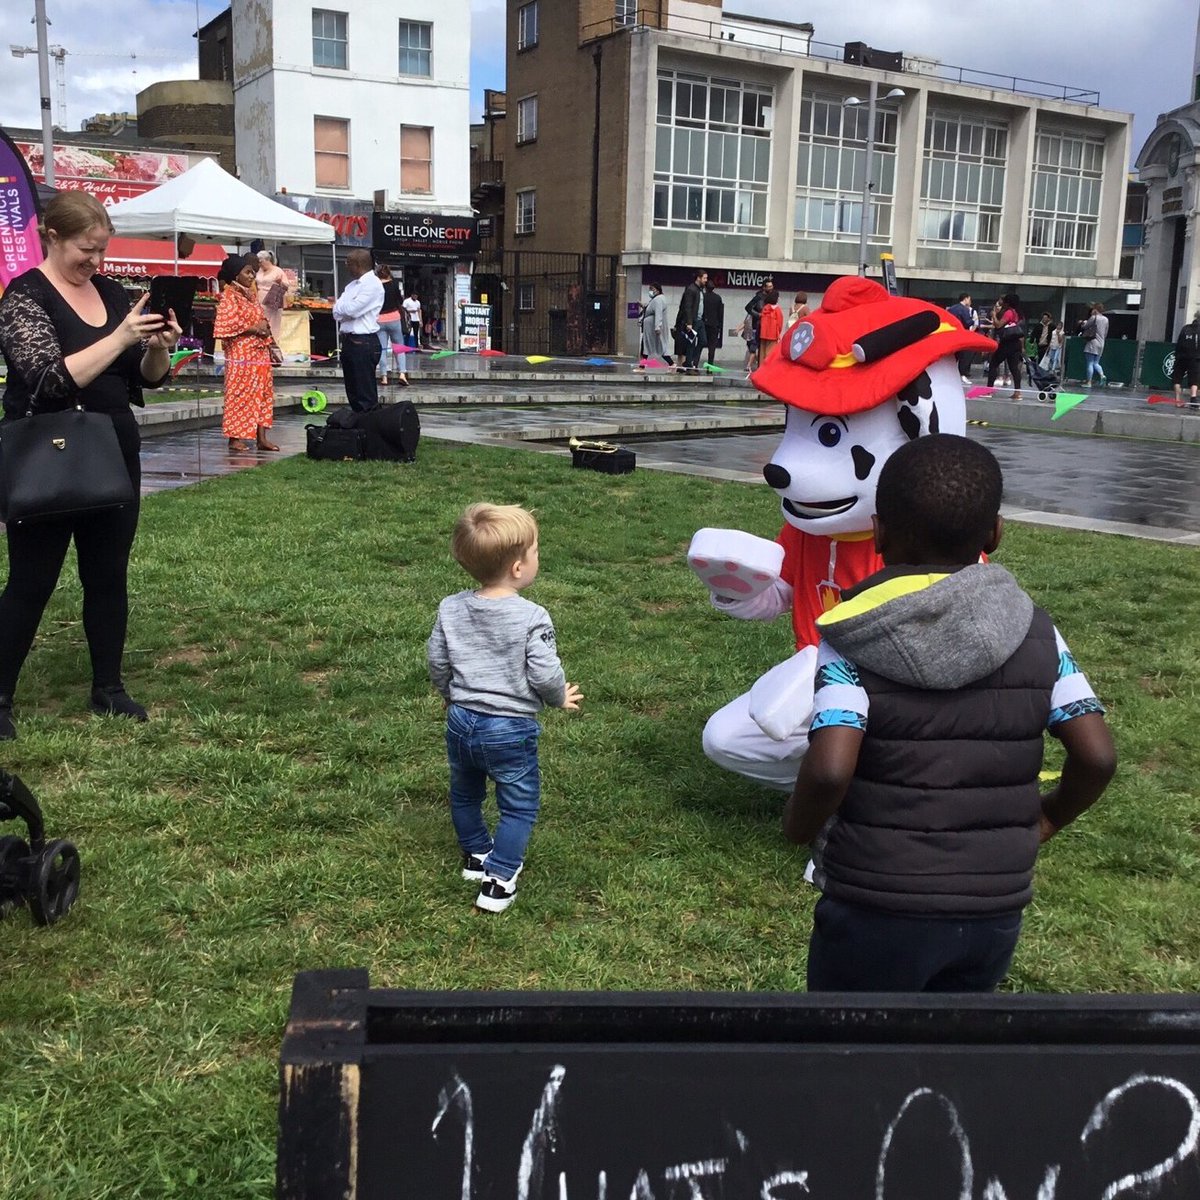 🌟Time to get busy!🌟 

Let's get active this Friday with sports🥎, sand art, mask making ✏️ and meet the mascot🐶  plus dance workshops for all ages!  

royalgreenwich.gov.uk/holidayfunfrid…